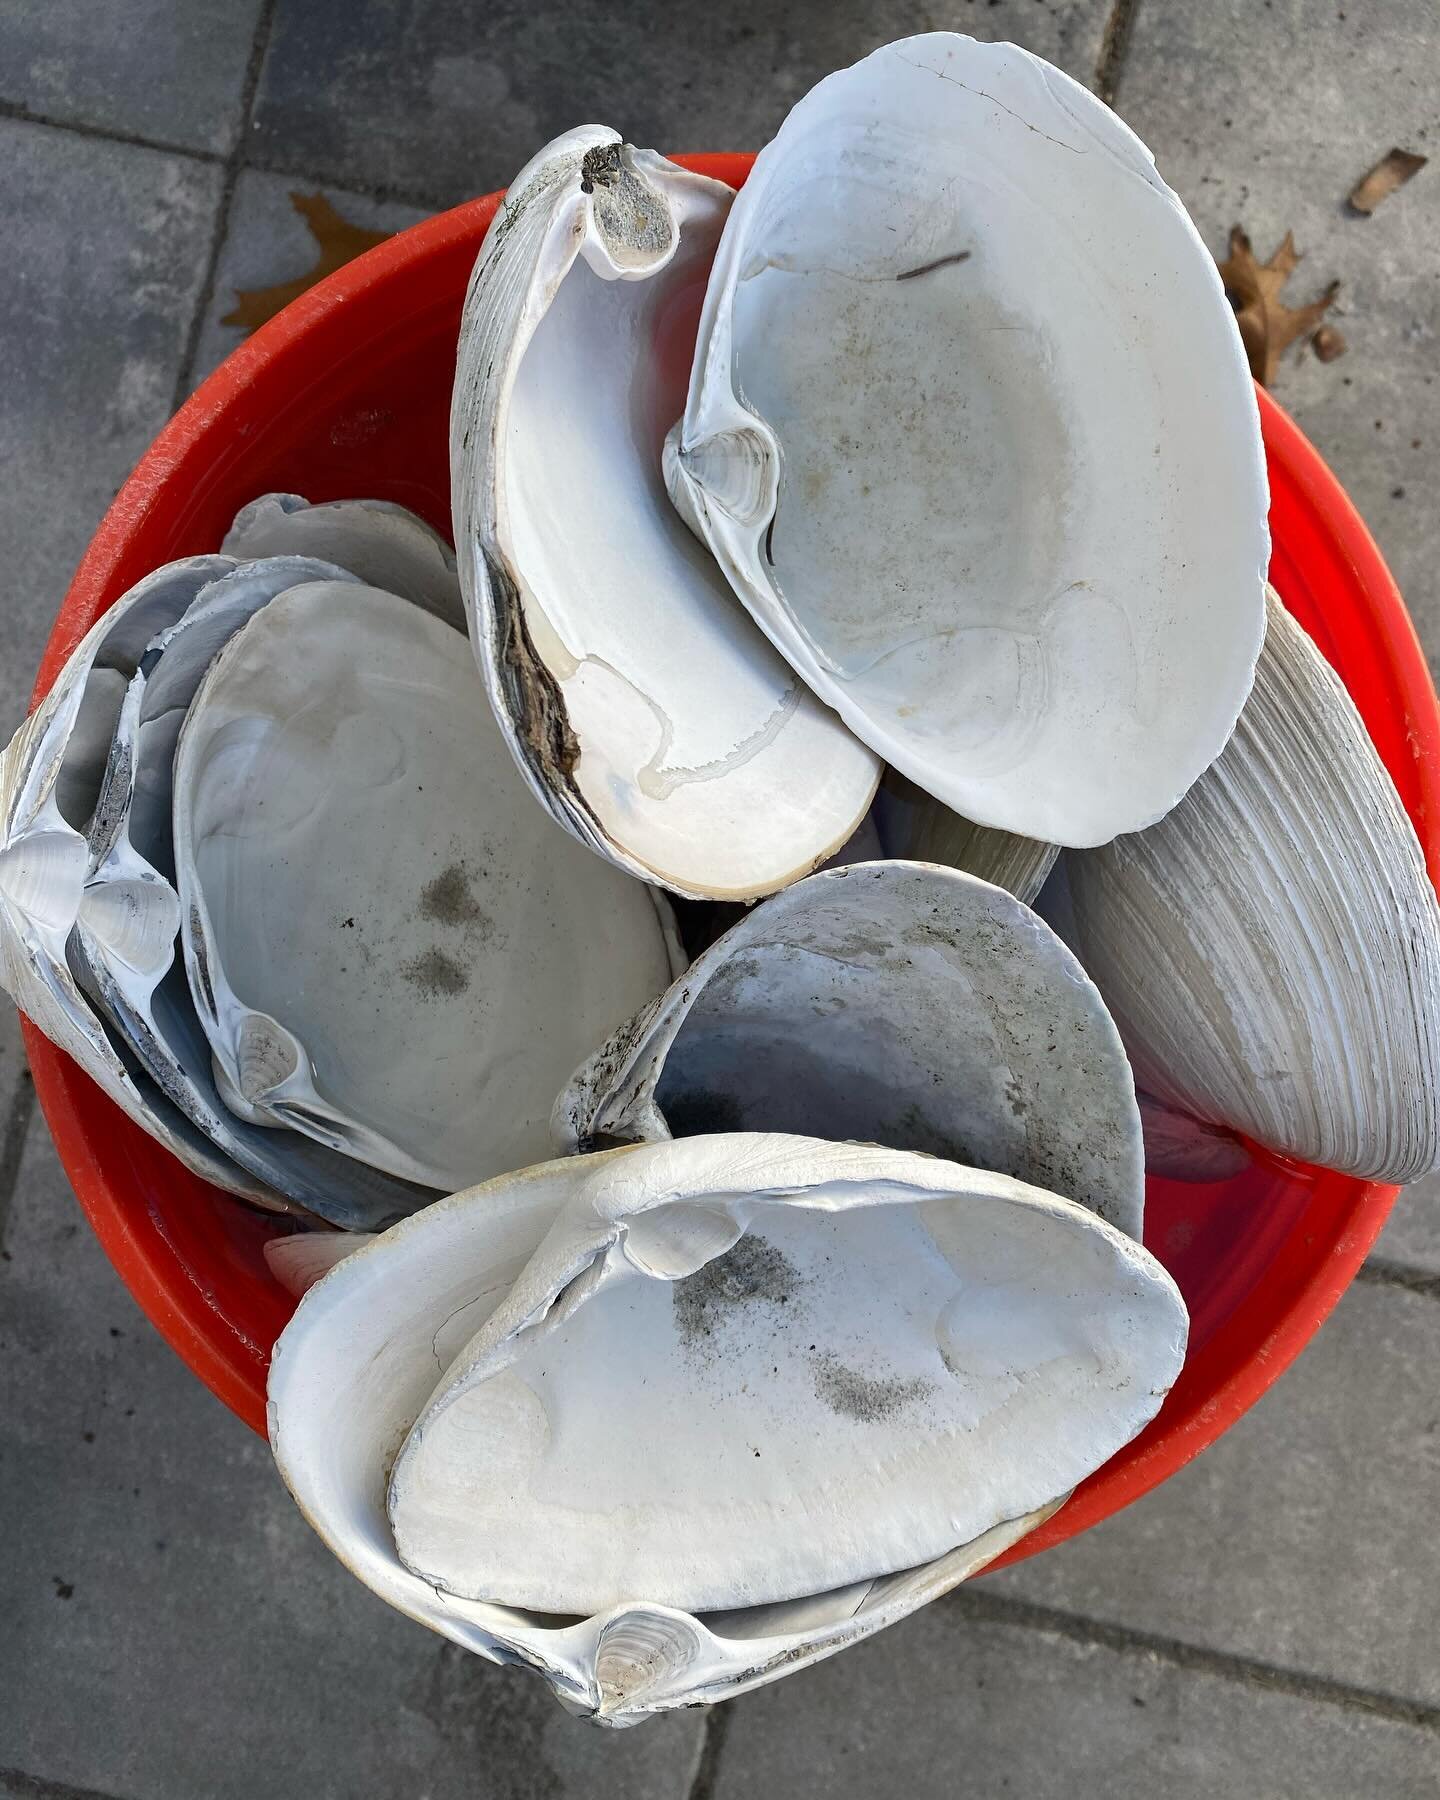 In this household, this is our first sign of Spring!!

LJM Designs is back in the studio&mdash;ready to get some quahog shell dishes back on your table!

I love where I live! 

#scituate #02066 #localgifts #oystershells #southshoreliving #shelldish #